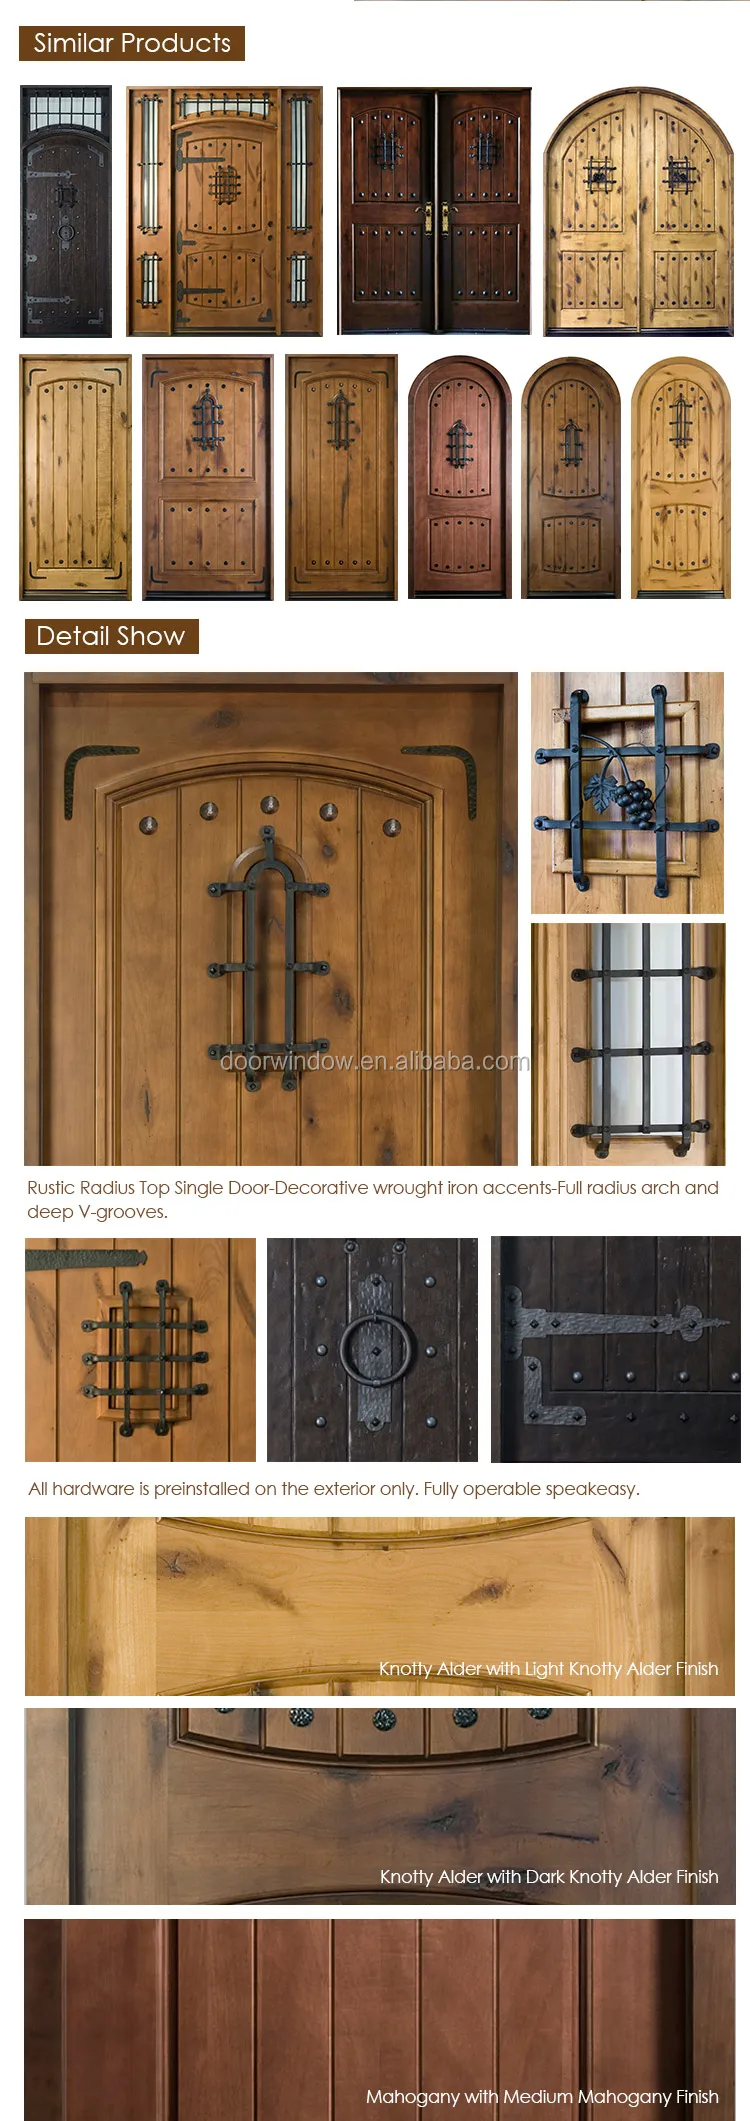 China manufacturers fancy exterior arched entry door knotty alder wooden swing door for home